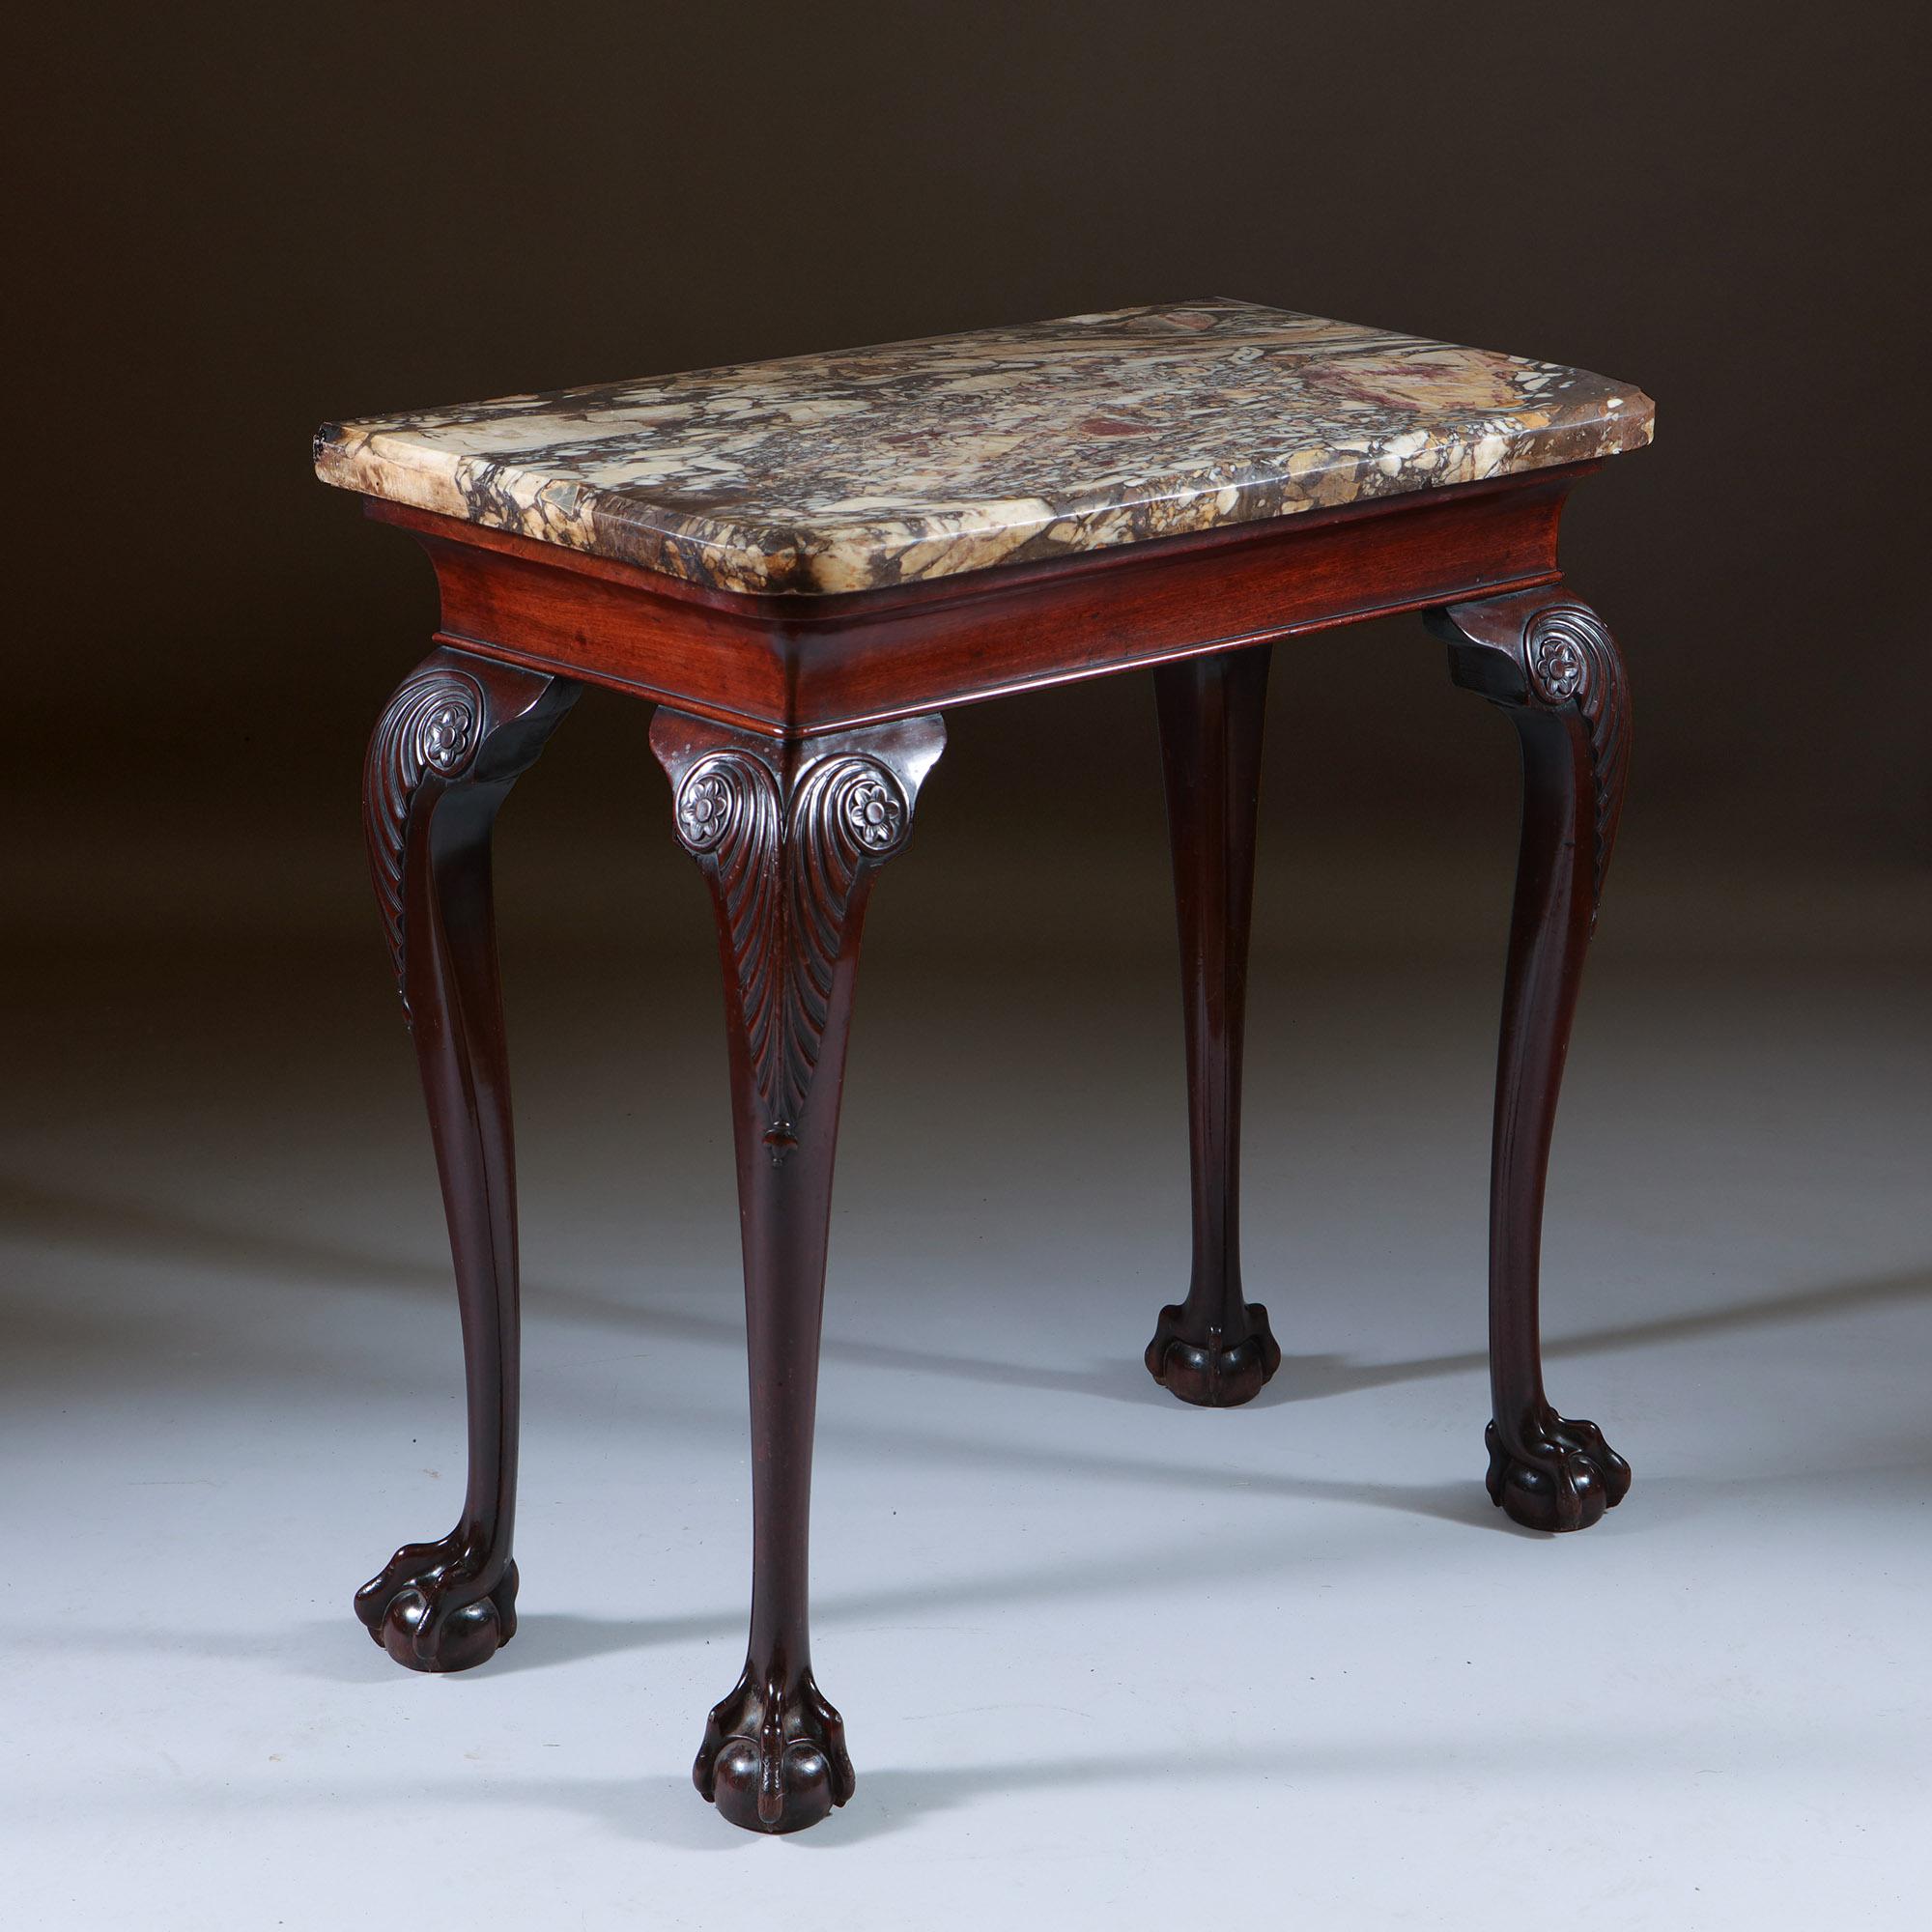 A Fine George II Mahogany Marble Topped Console Table, Circa 1750. Ireland

The original thick cut and chamfered patinated Breccia Viola marble top sits above the mahogany concave and moulded frieze, raised on four well drawn accentuated finely